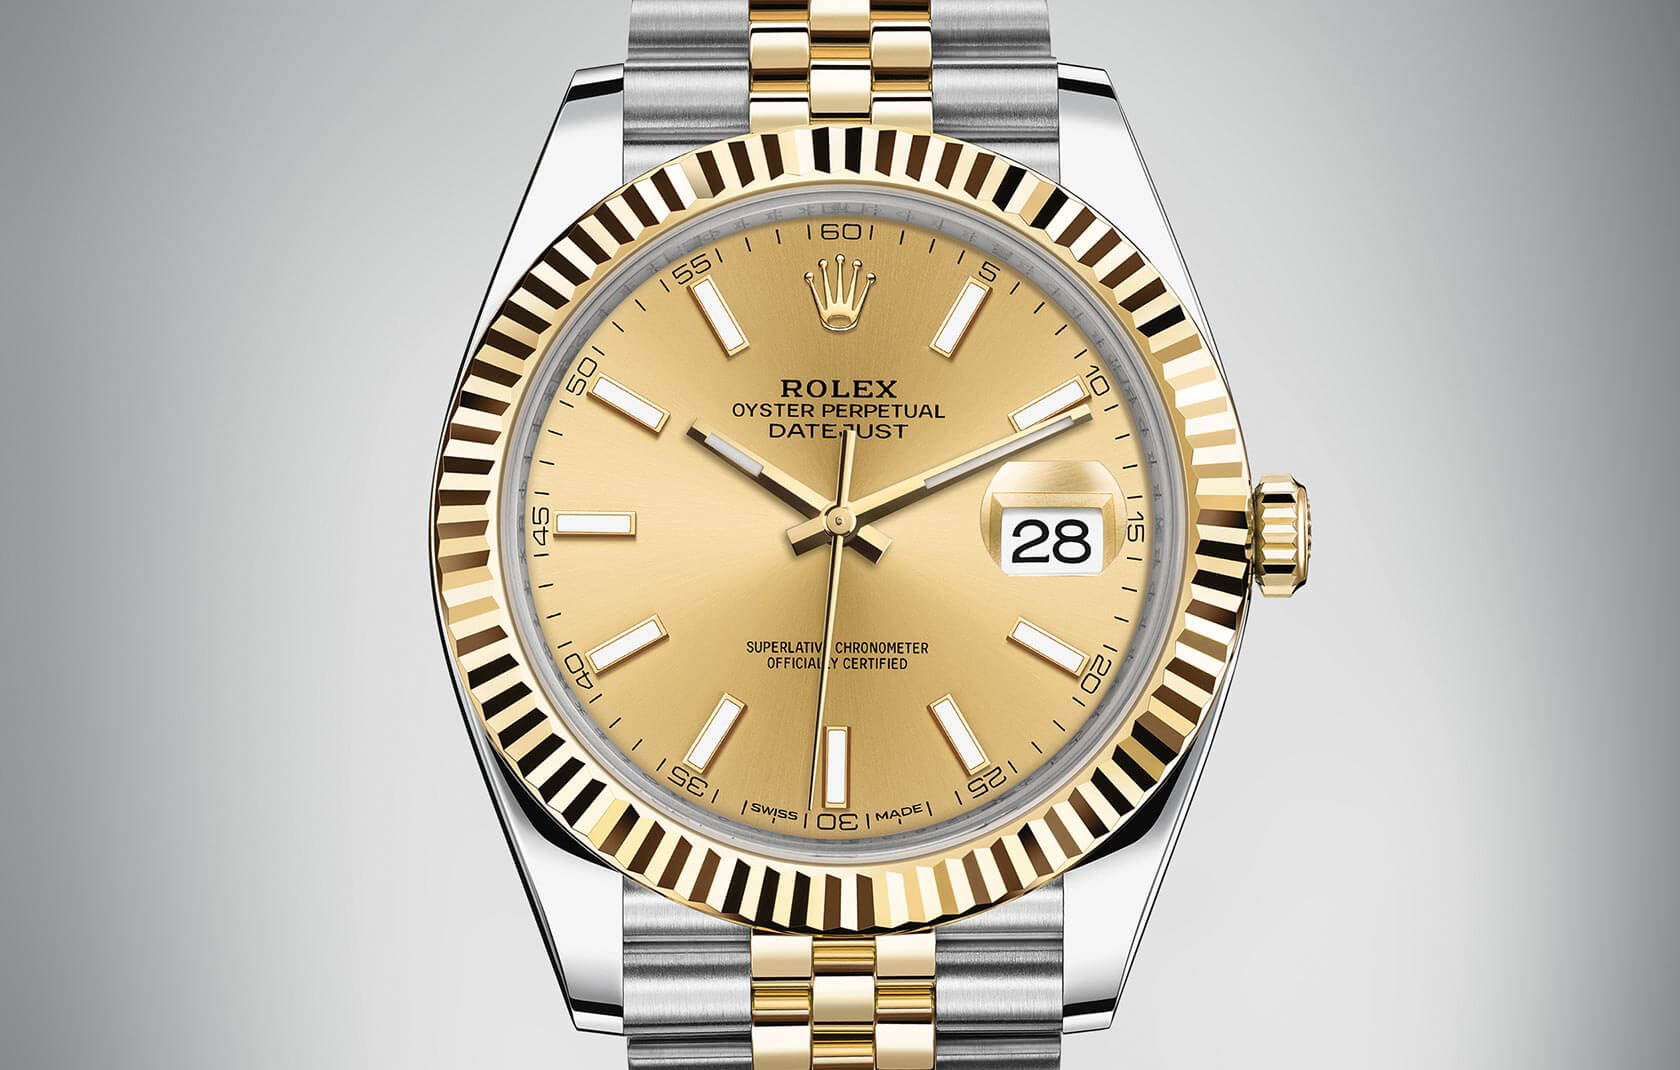 Fortløbende Fader fage levering Baselworld 2016: Rolex DateJust 41mm Watch – WristReview.com – Featuring  Watch Reviews, Critiques, Reports & News